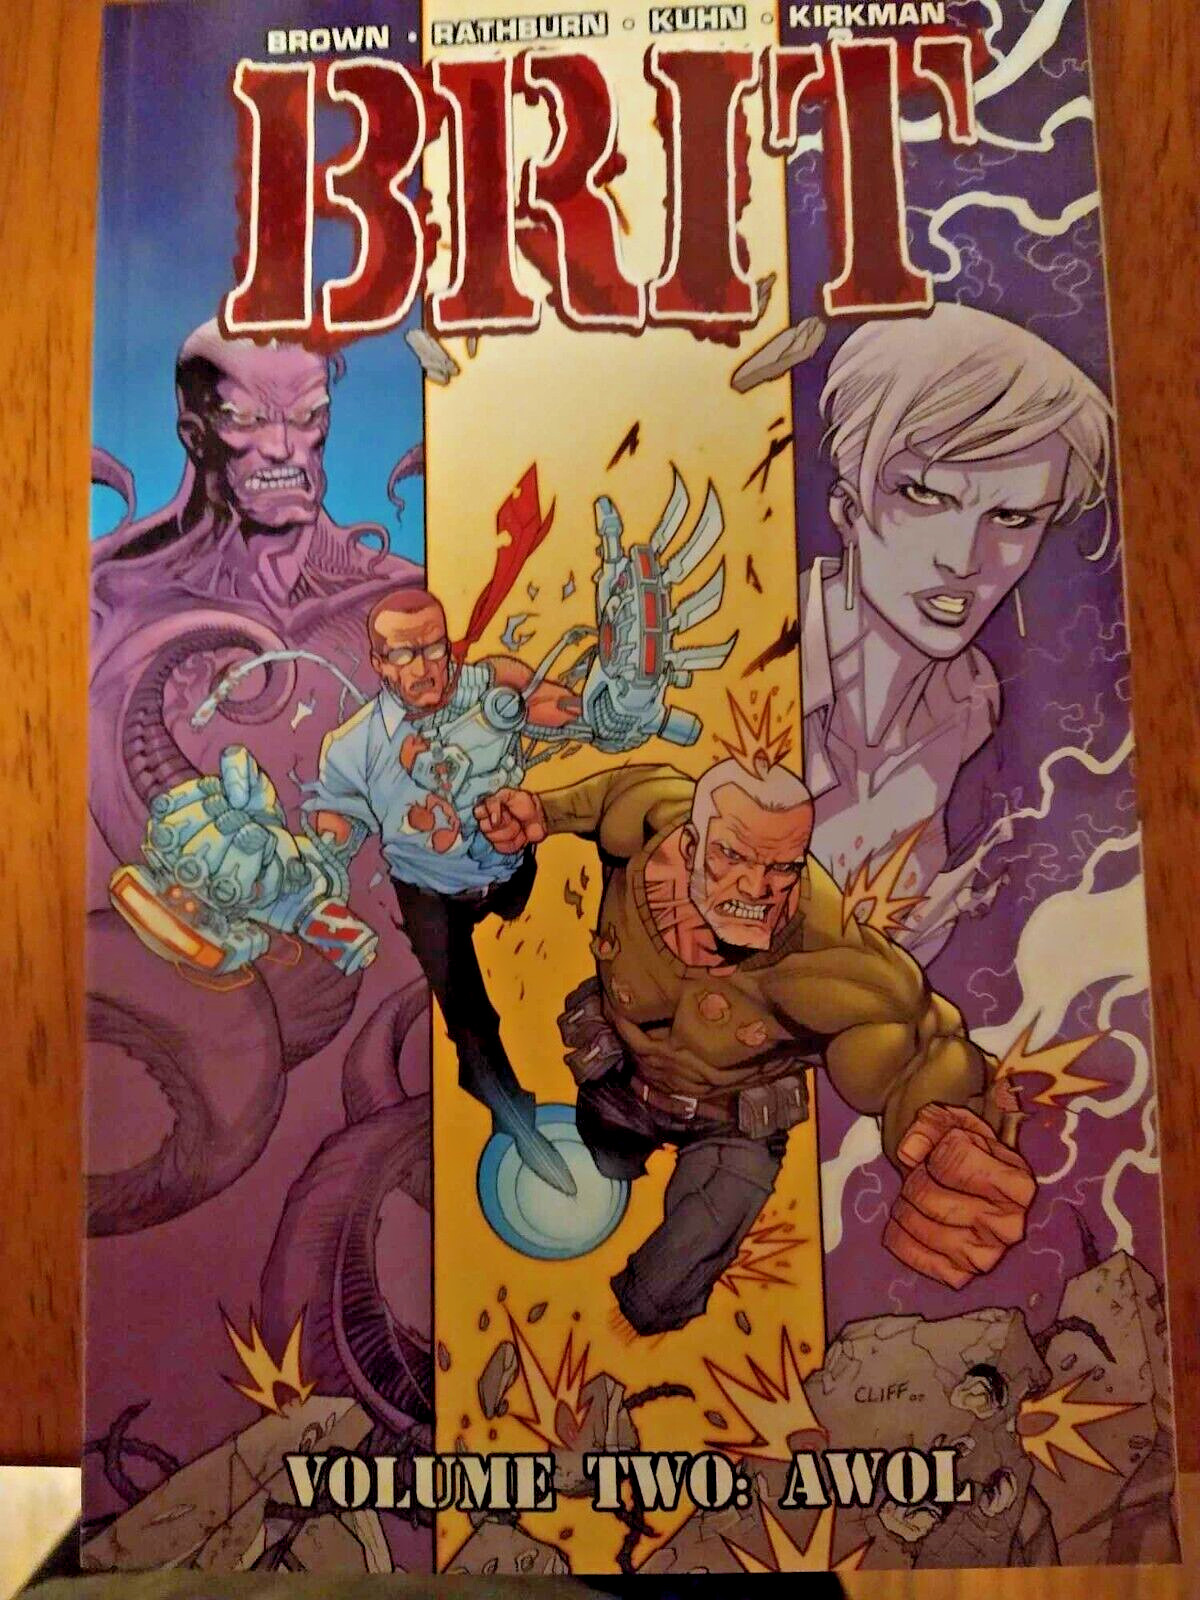 Brit Volume 2 AWOL by Bruce Brown Trade paperback Graphic Novel Image Comics